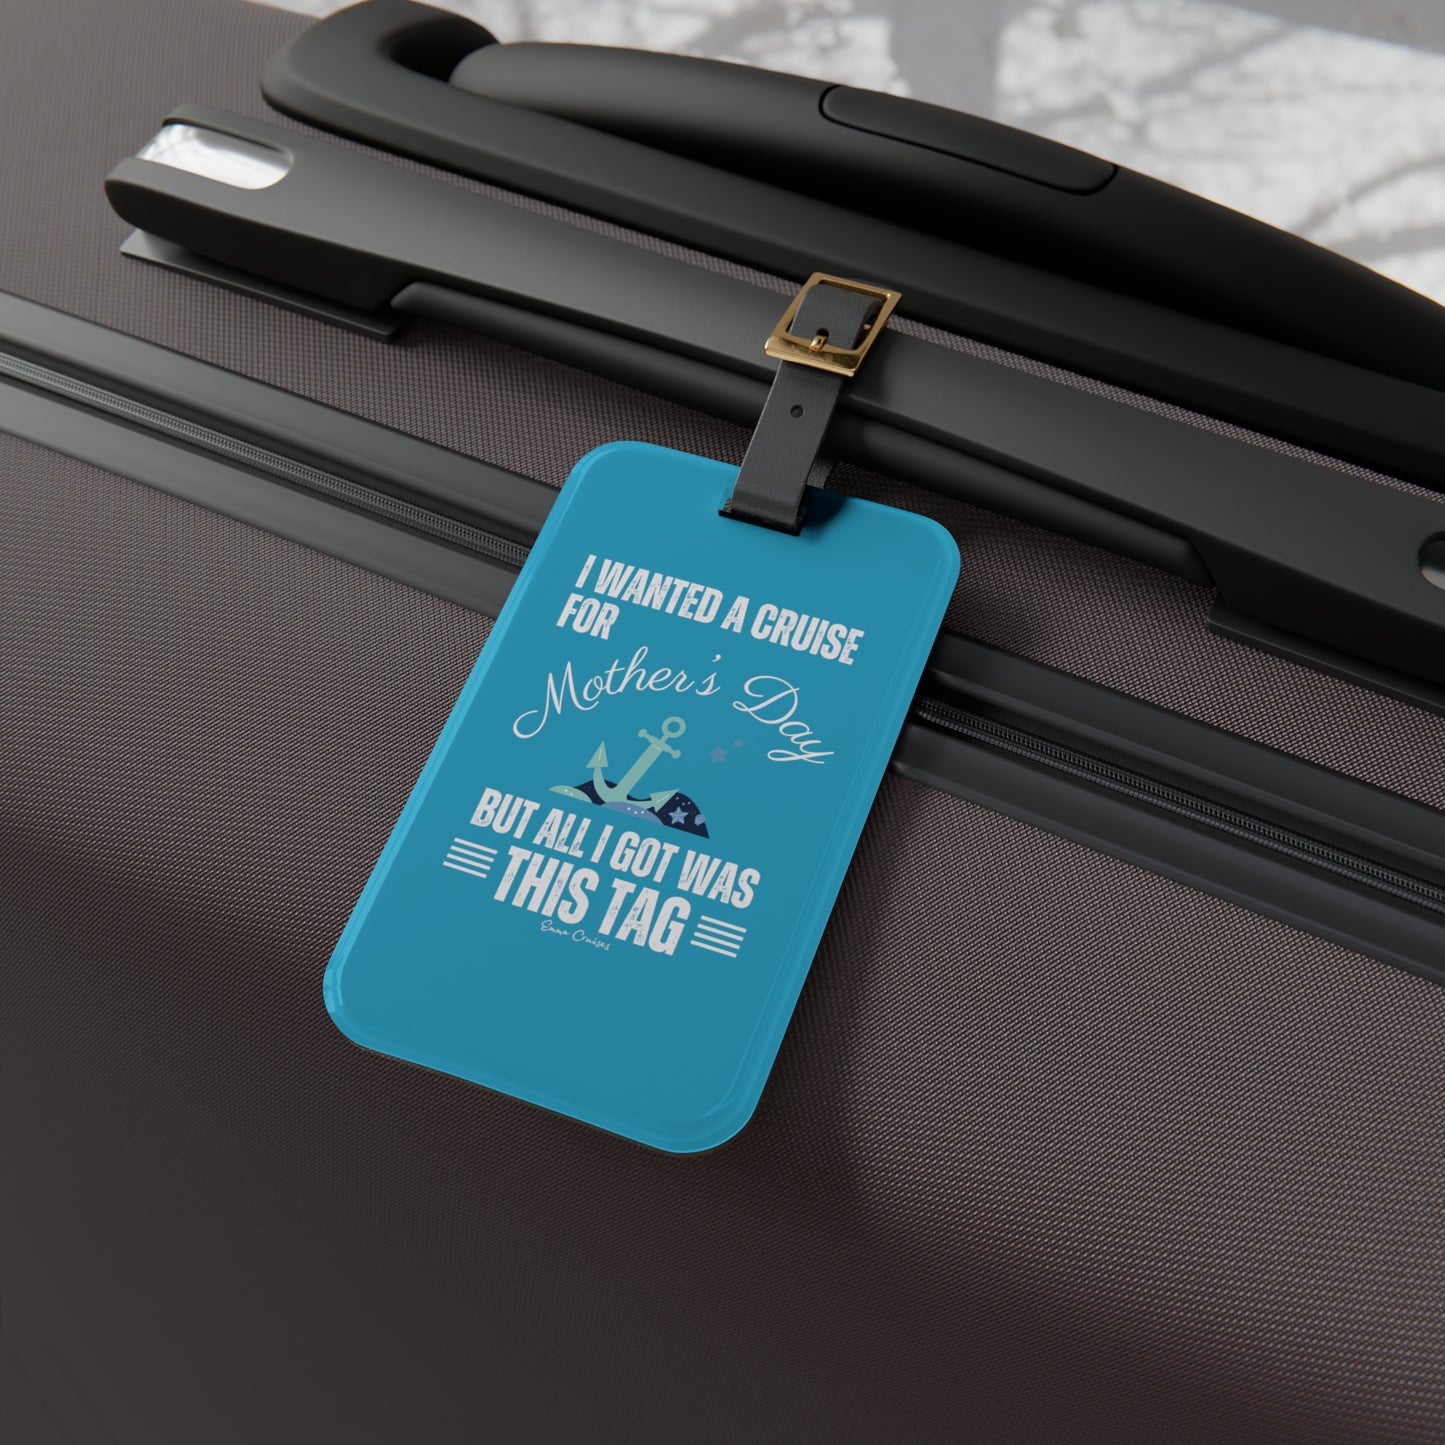 I Wanted a Cruise for Mother's Day - Luggage Tag